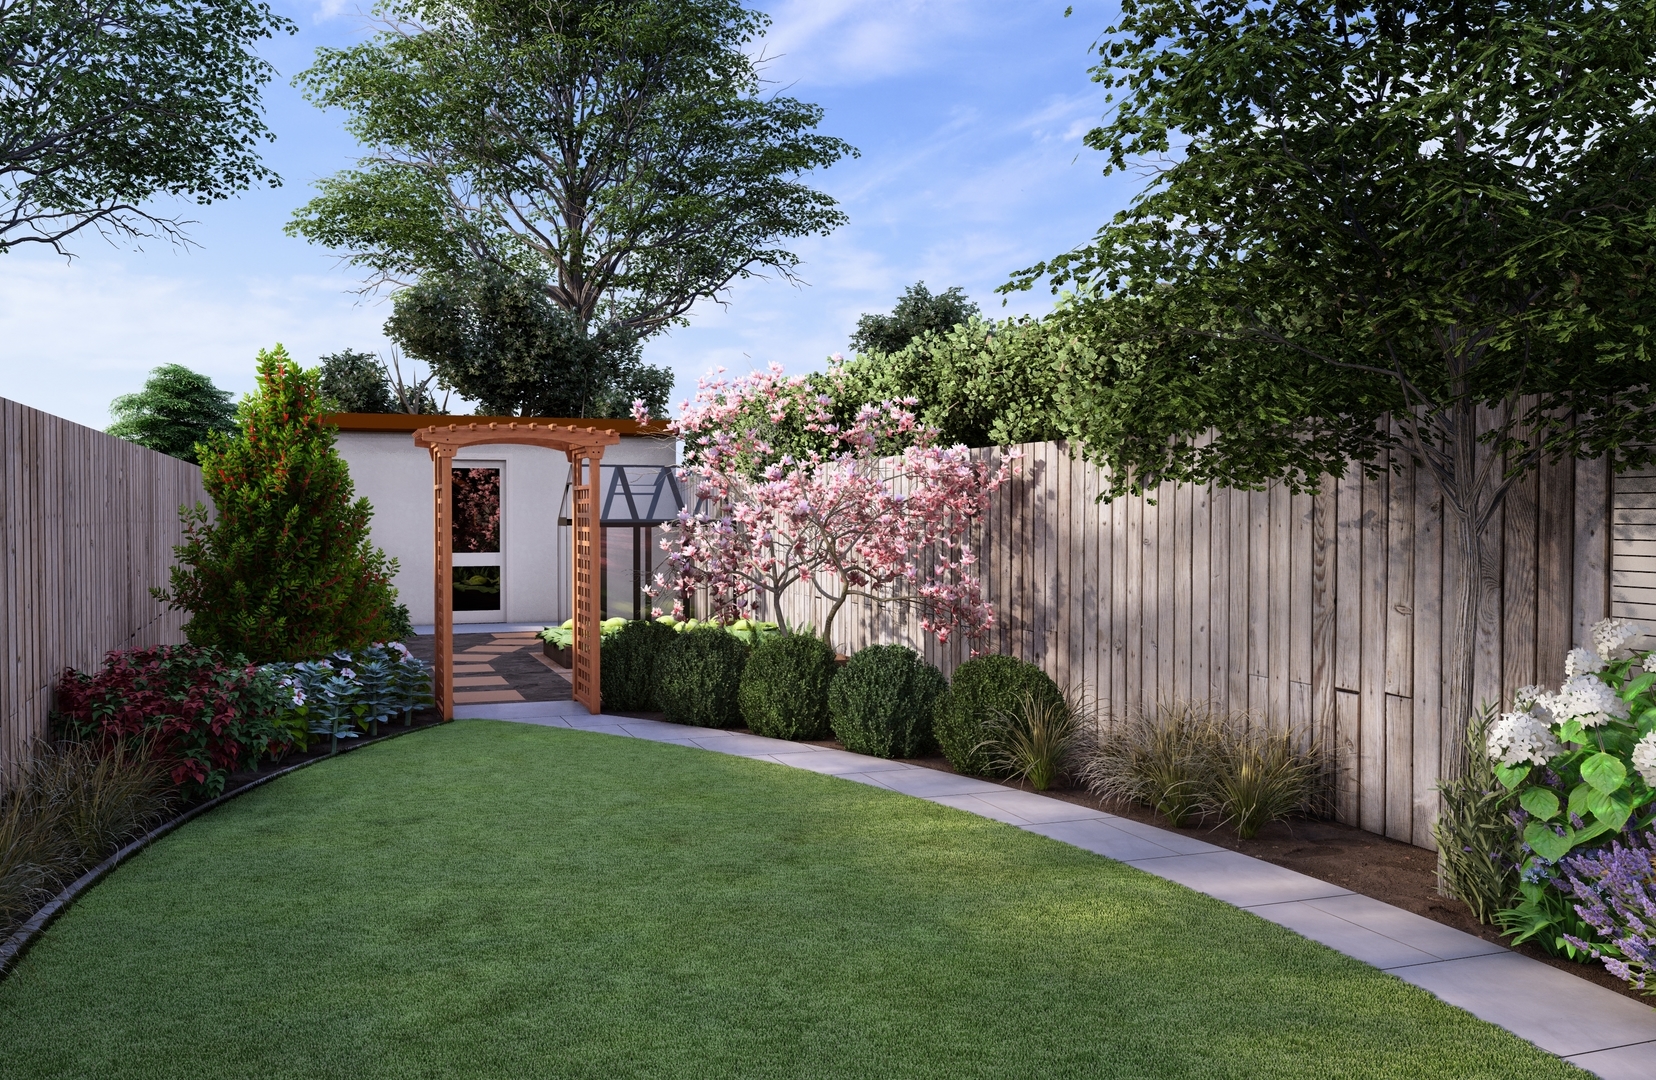 Garden Design Dublin D6W features natural limestone paving, bespoke horizontal timber slat fencing, natural drystone Raised Planter, specimen trees and colourful perennial planted borders.